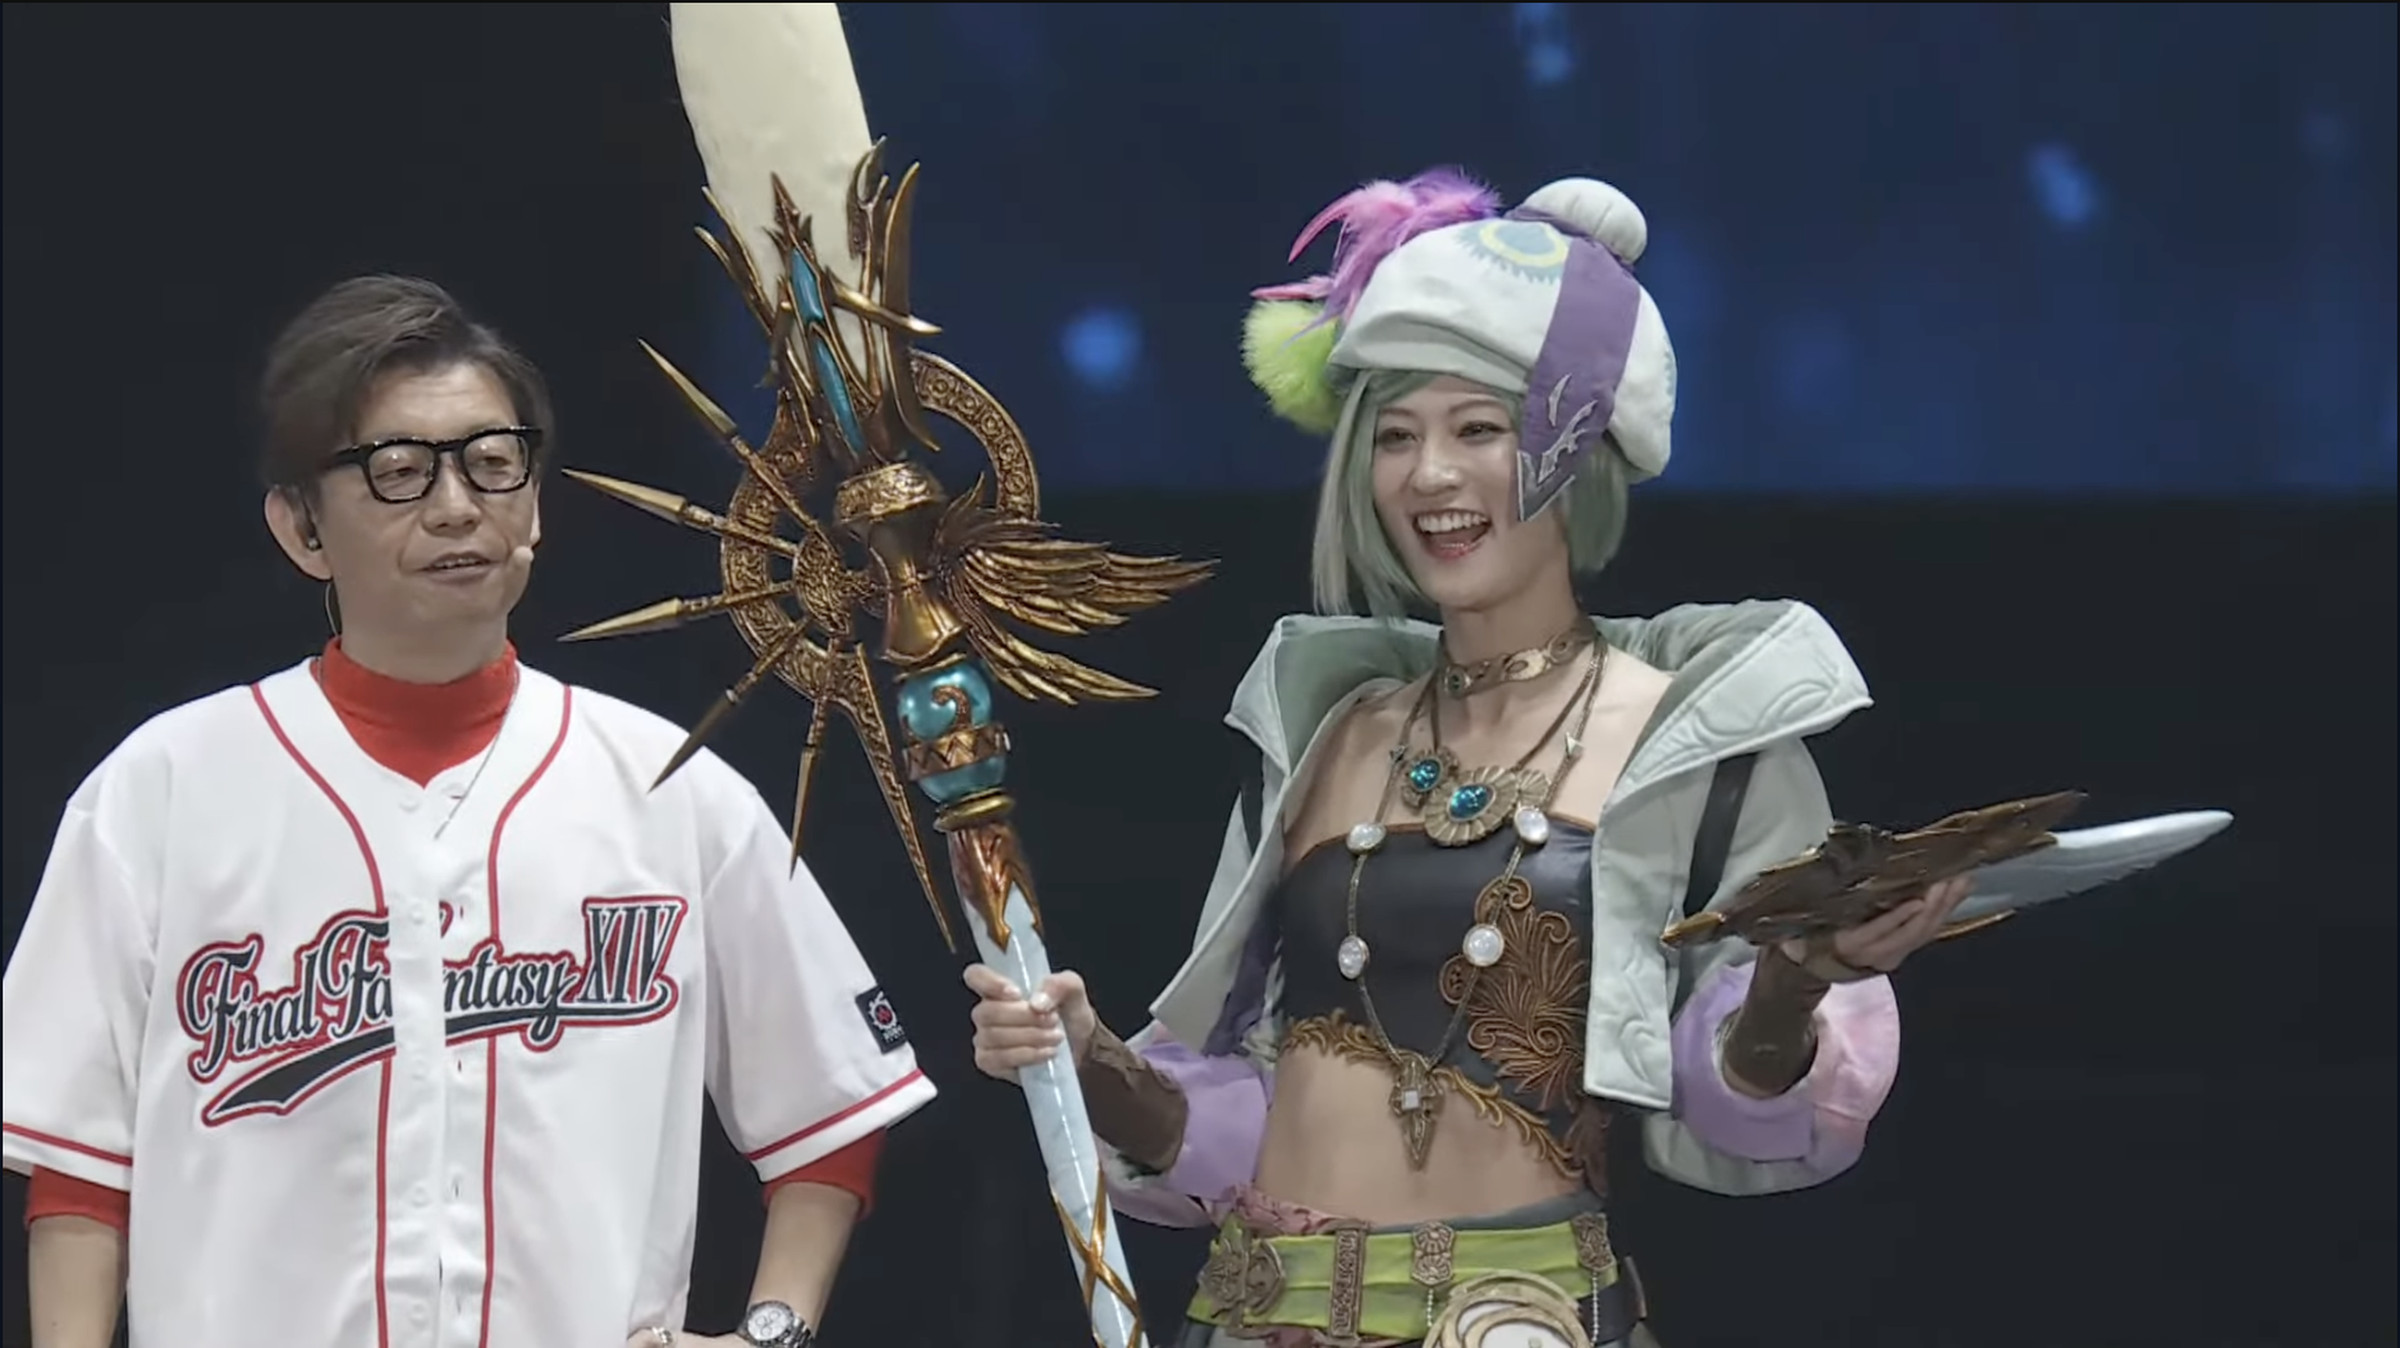 Screenshot from the Final Fantasy XIV Fan Fest event featuring FFXIV game producer Naoki Yoshida on the left wearing a Final Fantasy XIV red and white baseball jersey standing next to a model cosplaying the pictomancer job class.